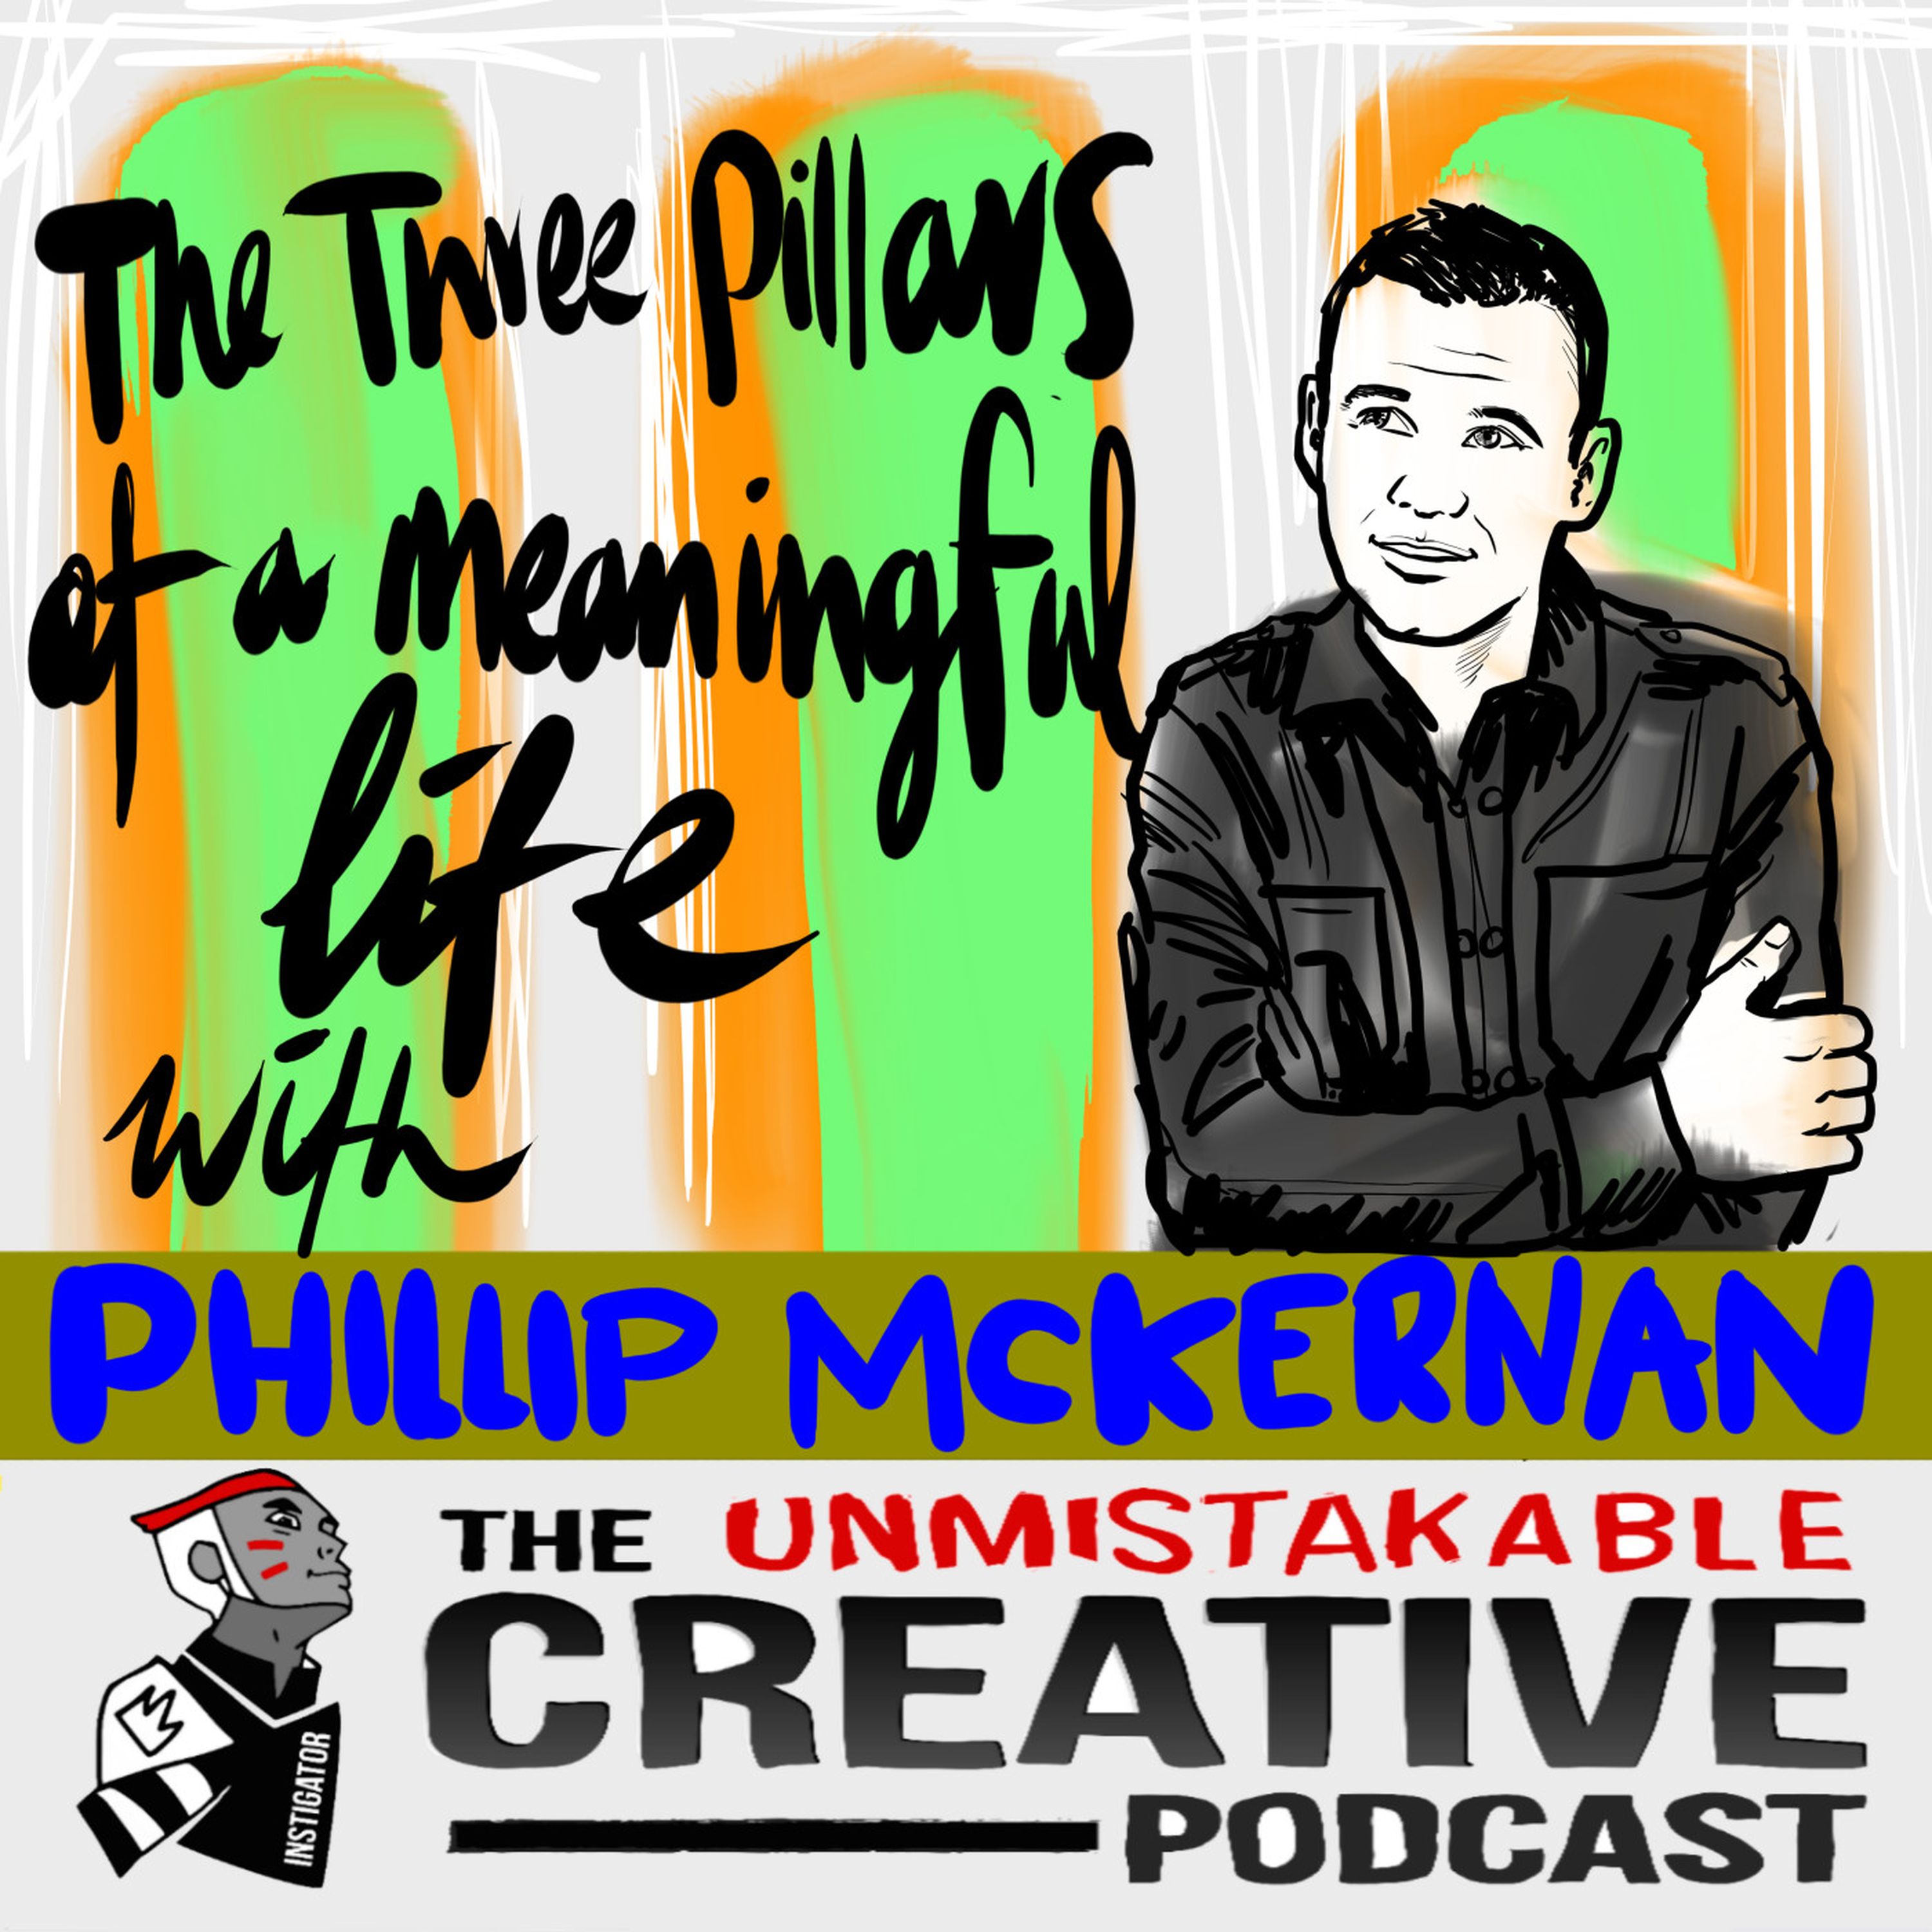 The Pillars of a Meaningful Life with Phillip Mckernan